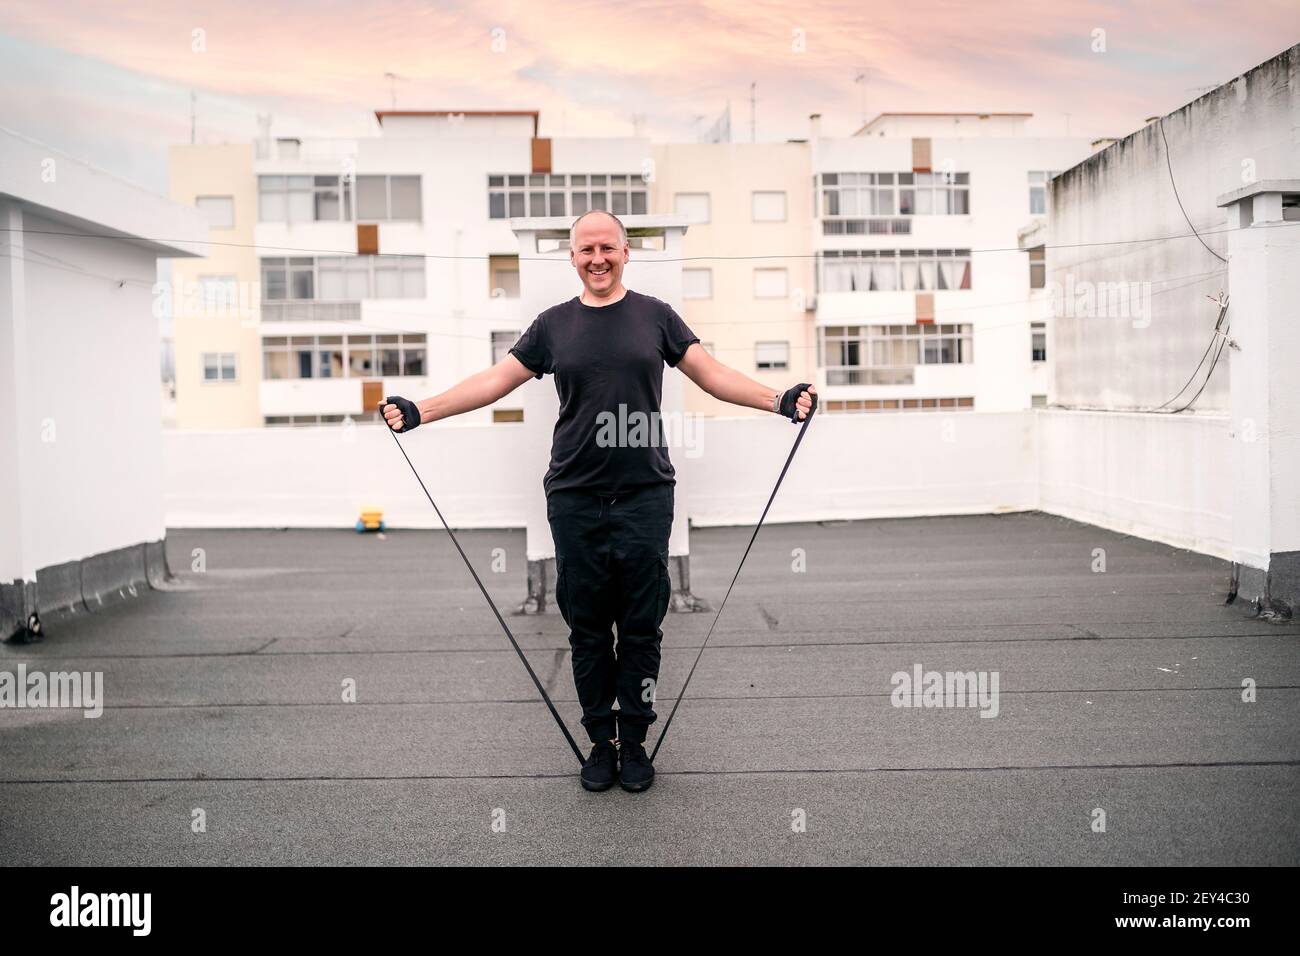 A man exercising with gum on the rooftop during self-confinement caused by pandemic Stock Photo